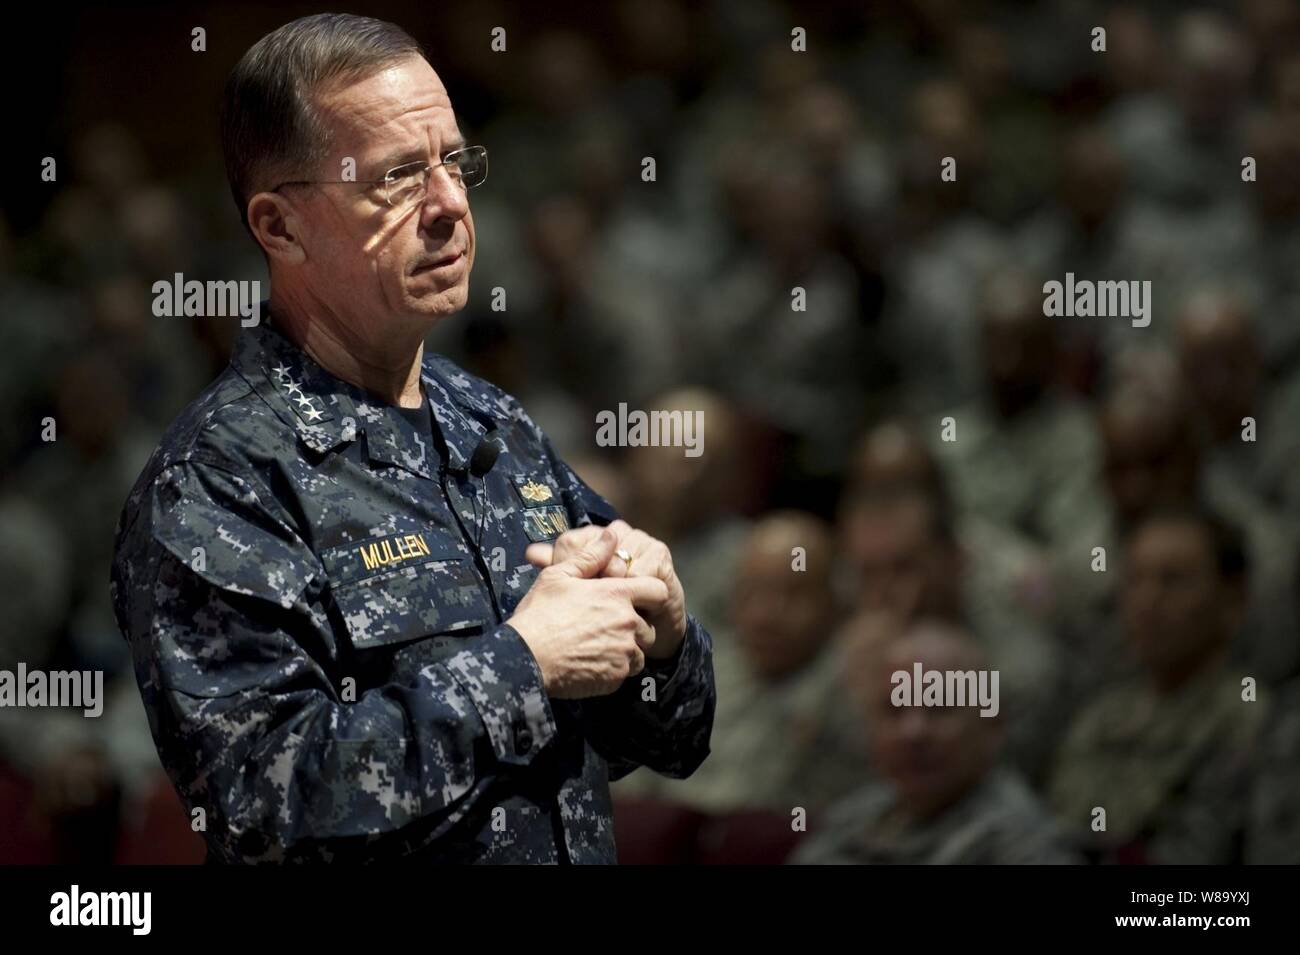 Chairman of the Joint Chiefs of Staff Adm. Mike Mullen, U.S. Navy, addresses students assigned to the U.S. Army Sergeants Major Academy at Fort Bliss in El Paso, Texas, on March 10, 2011. Stock Photo